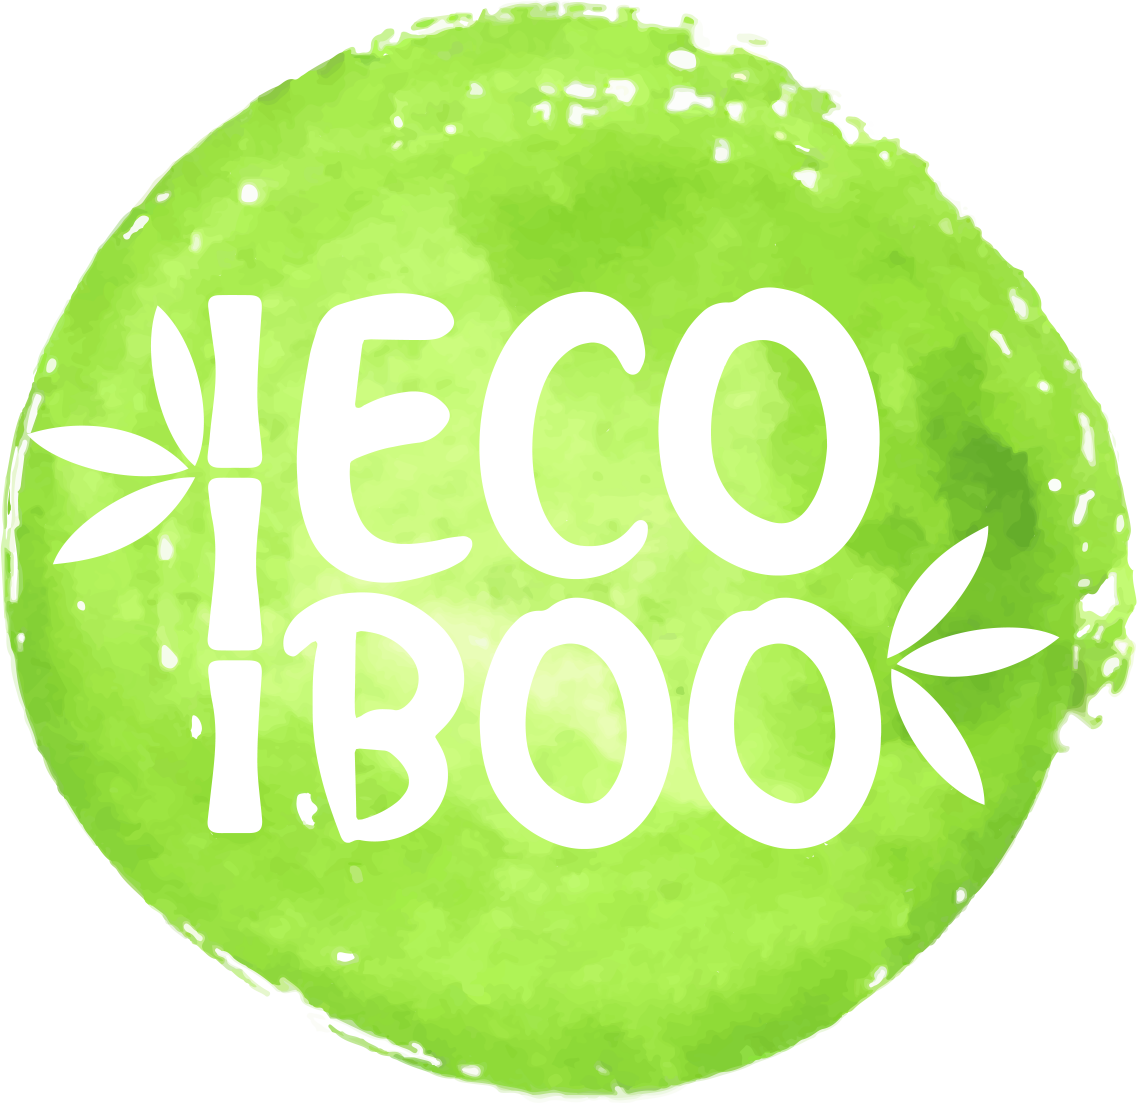 Ecoboo - Reusable paper towels, bamboo cleaning cloths, dishcloths, loofah sponges brand logo image